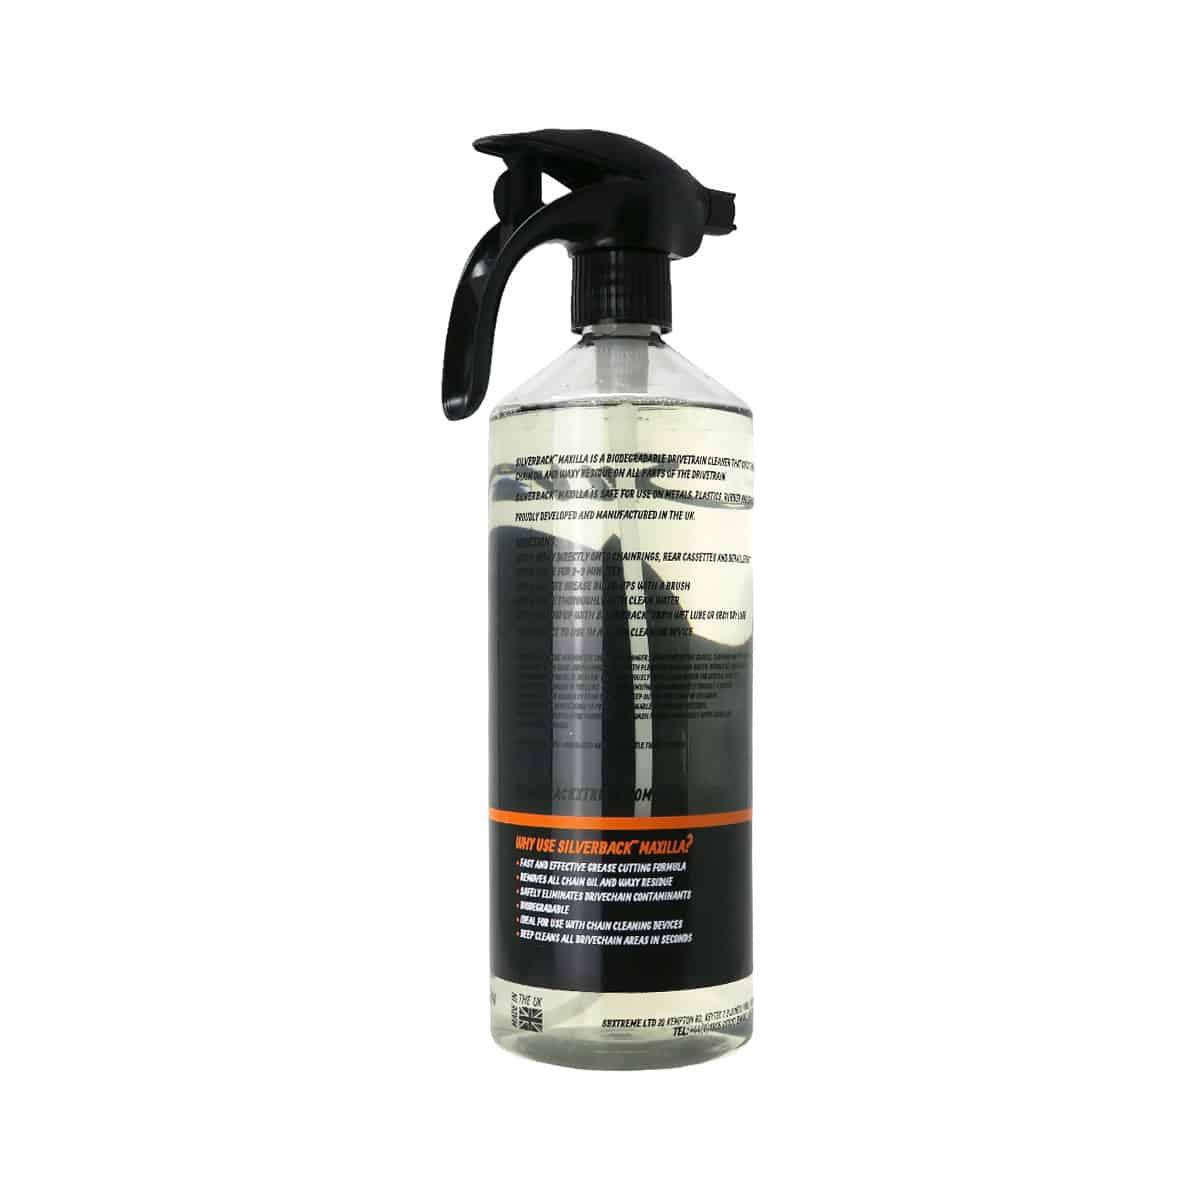 Silverback Xtreme Maxilla Chain & Drivetrain Cleaner: Powerful degreaser that is gentle on the critical seals & chain rings 2